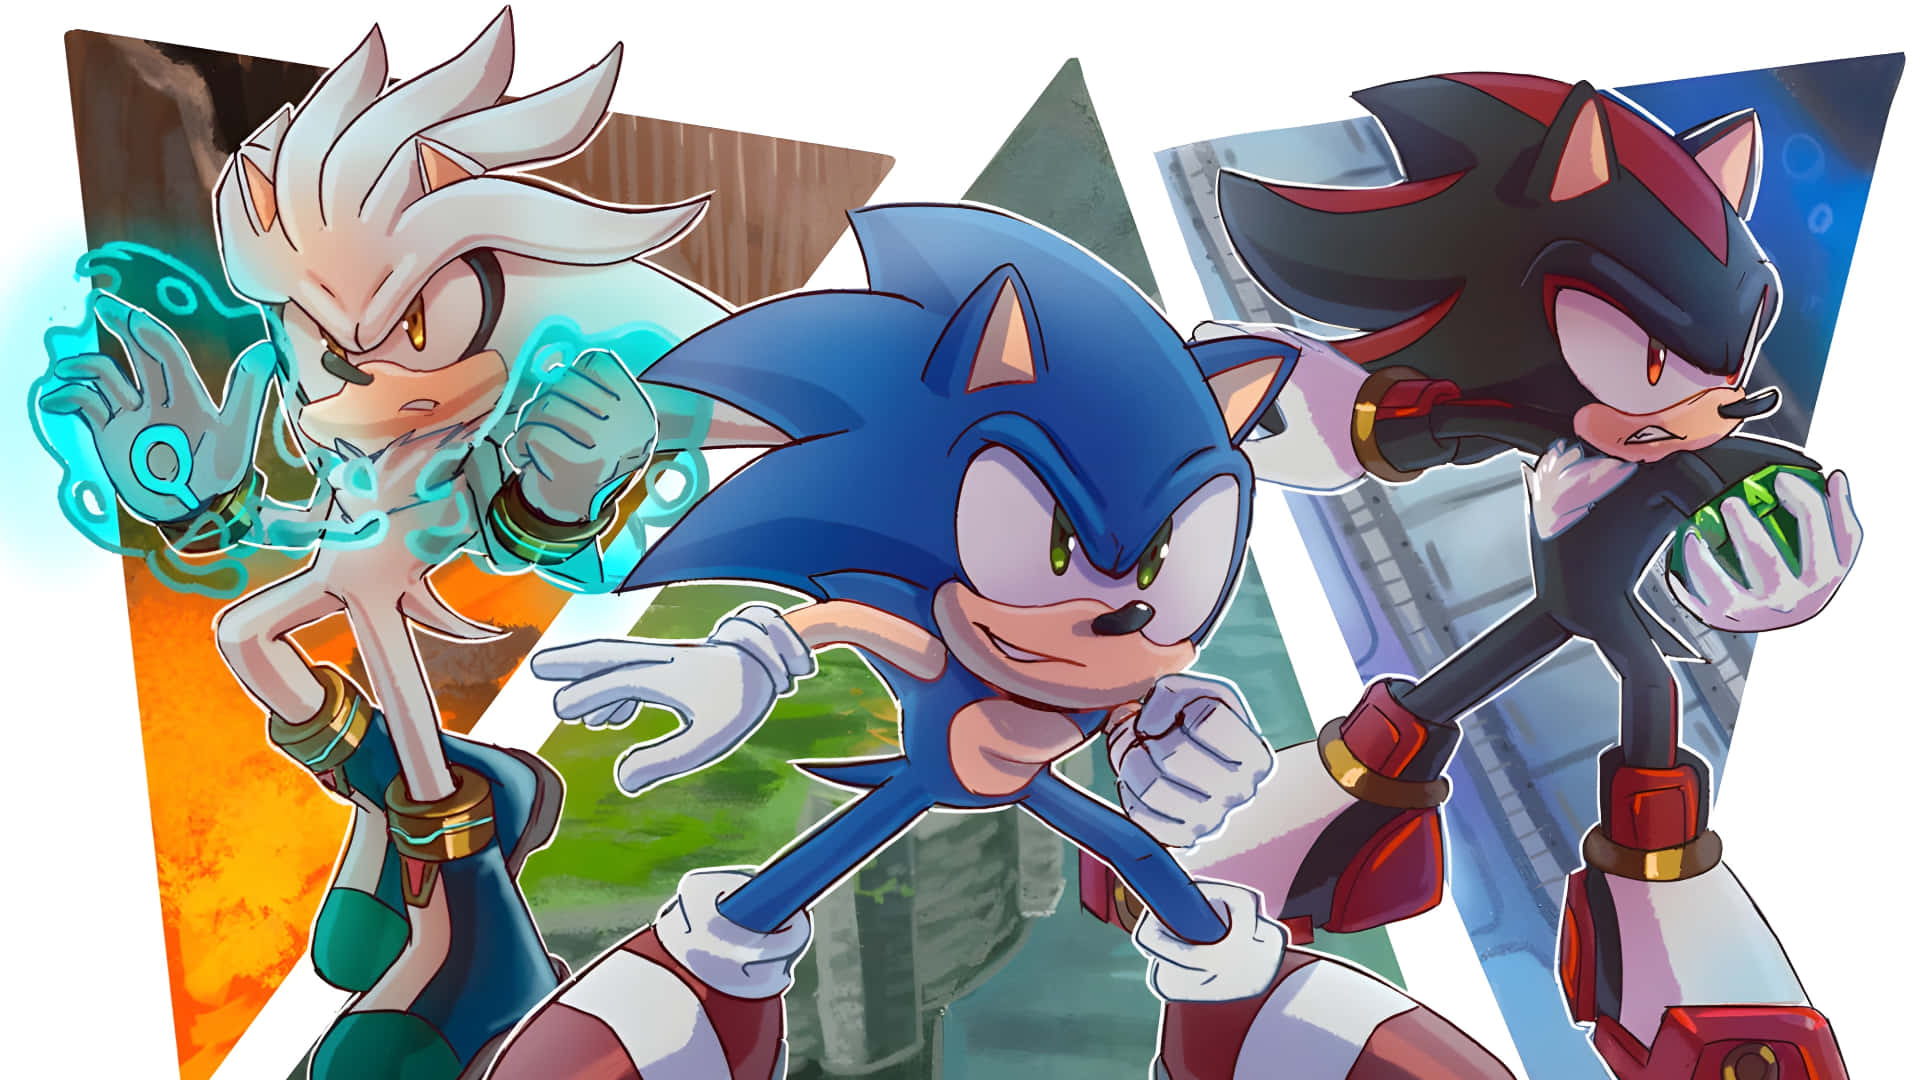 Sonic Adventure HD - High-definition gaming experience with Sonic the Hedgehog. Wallpaper